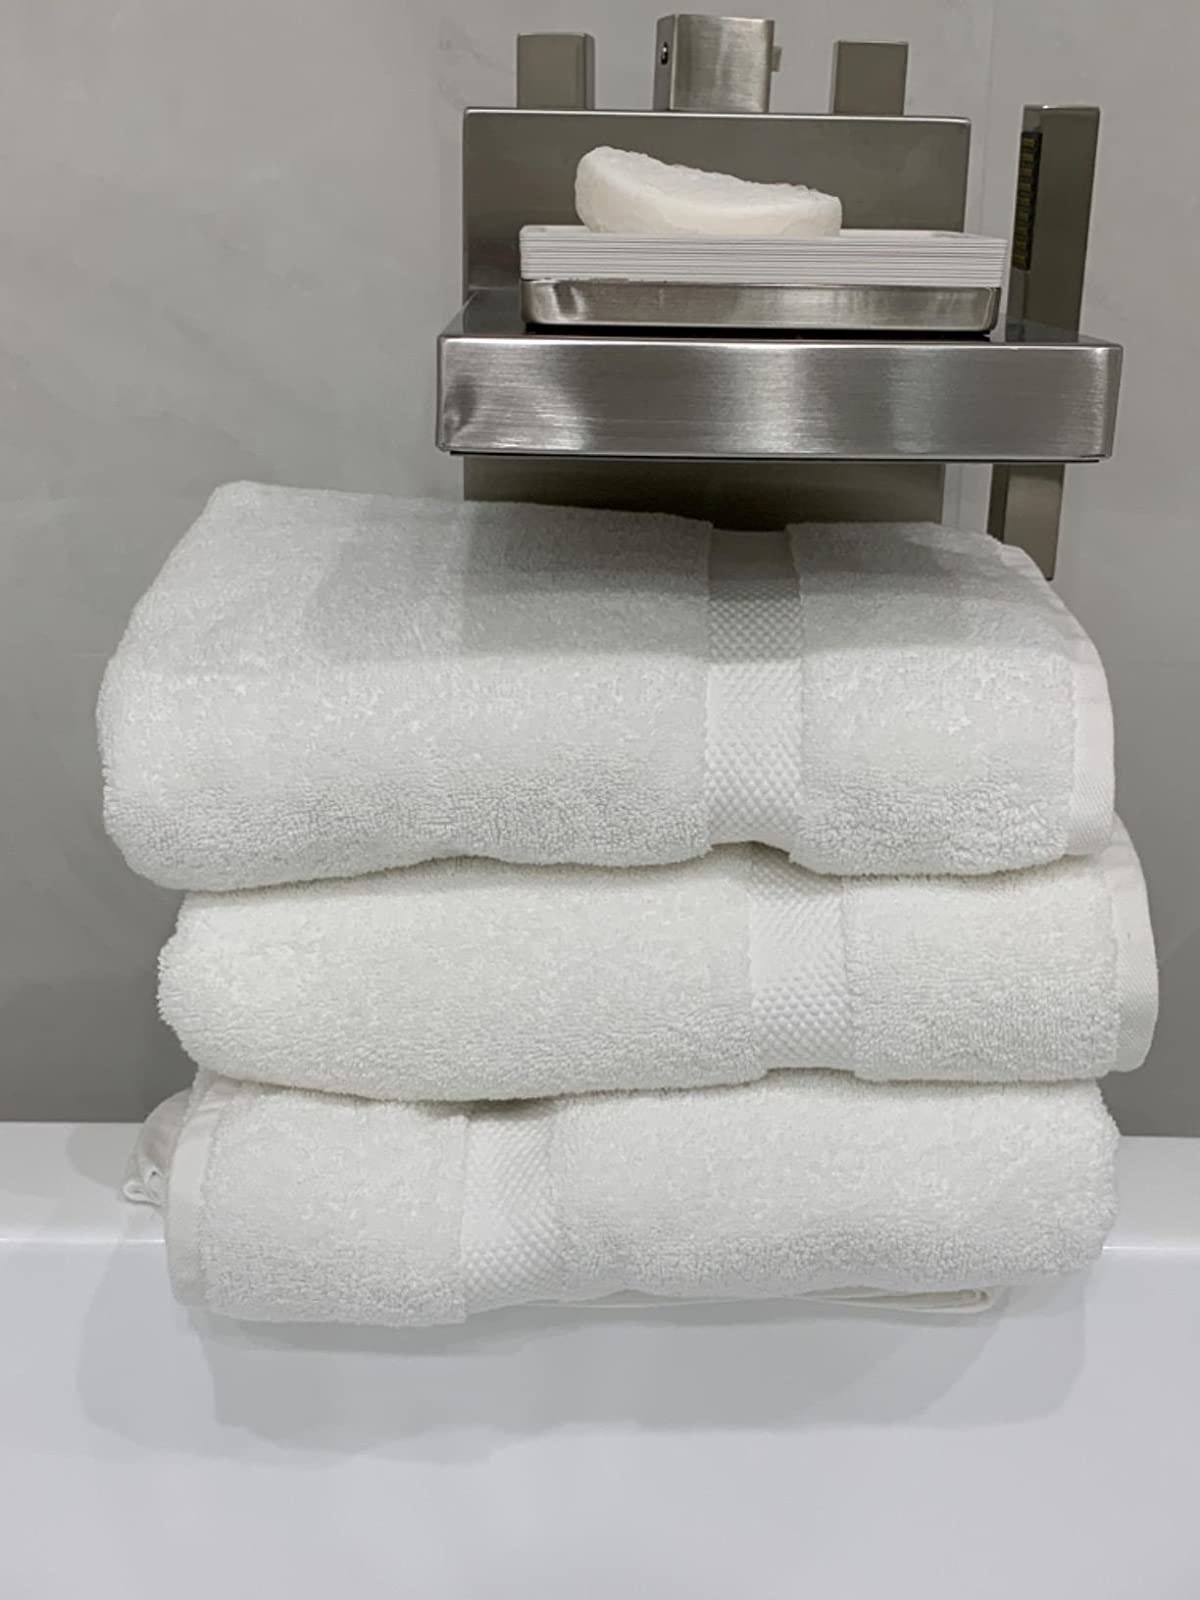 The white towels on the edge of a tub